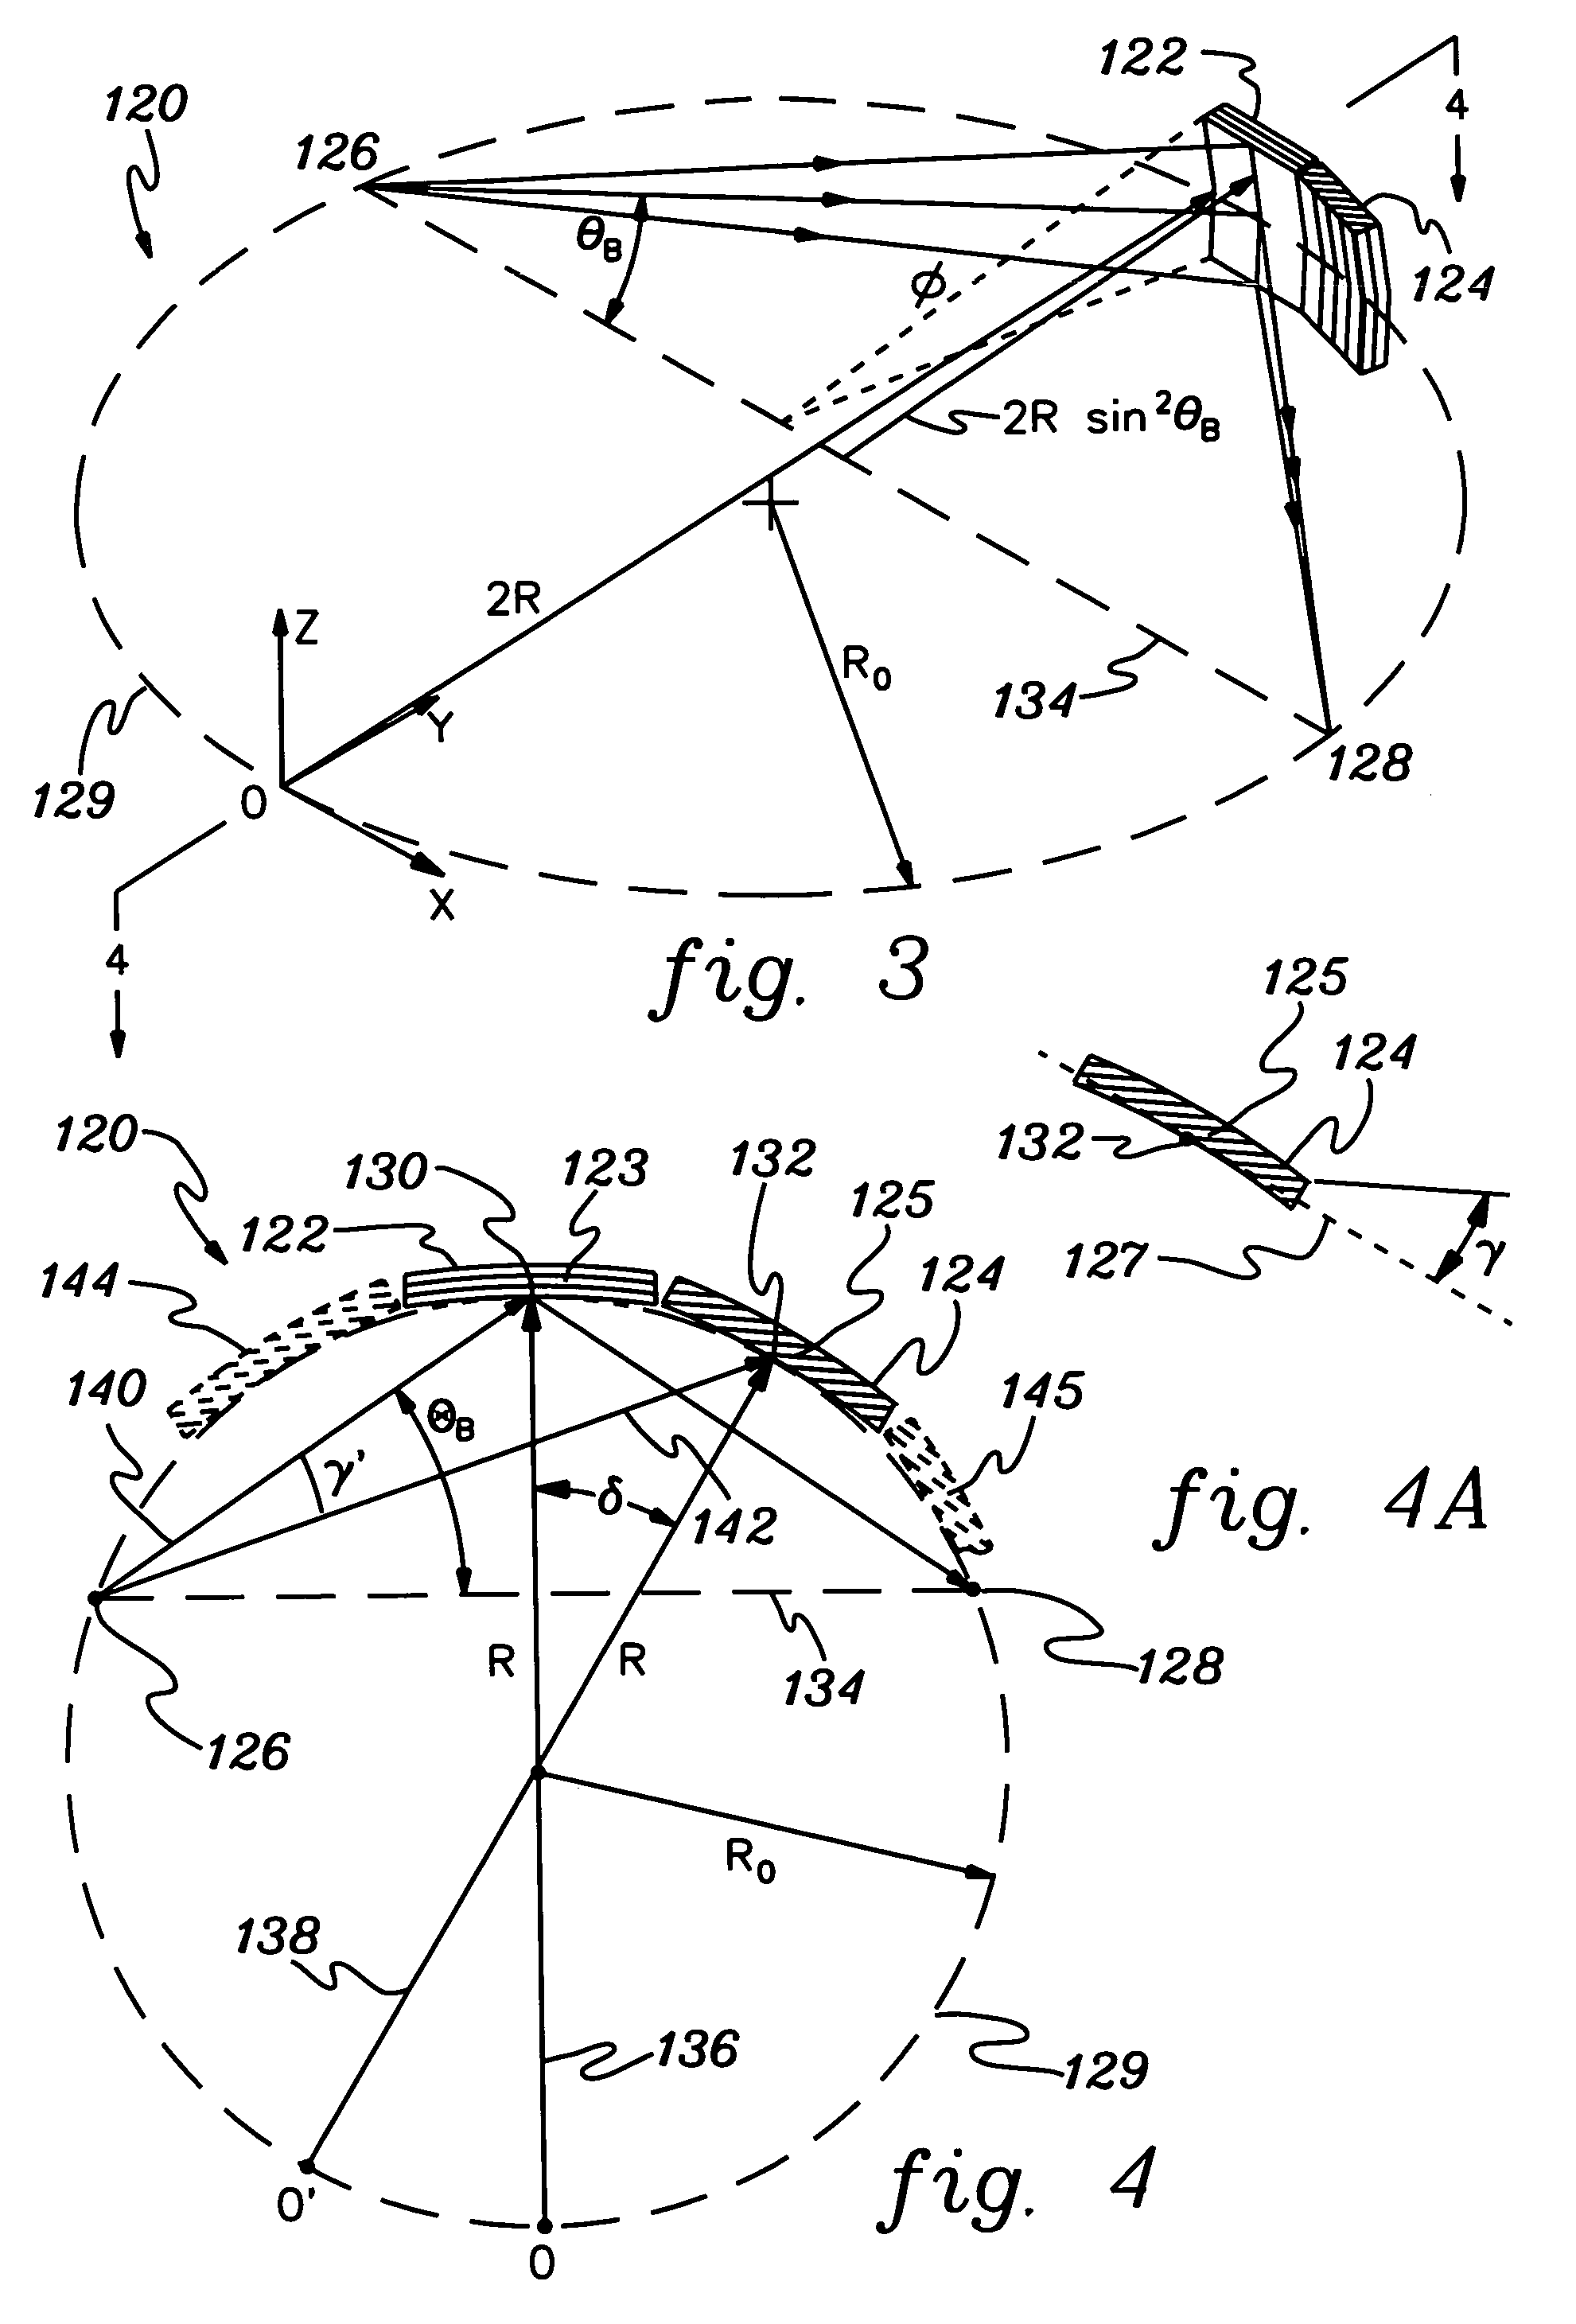 Optical device for directing x-rays having a plurality of optical crystals